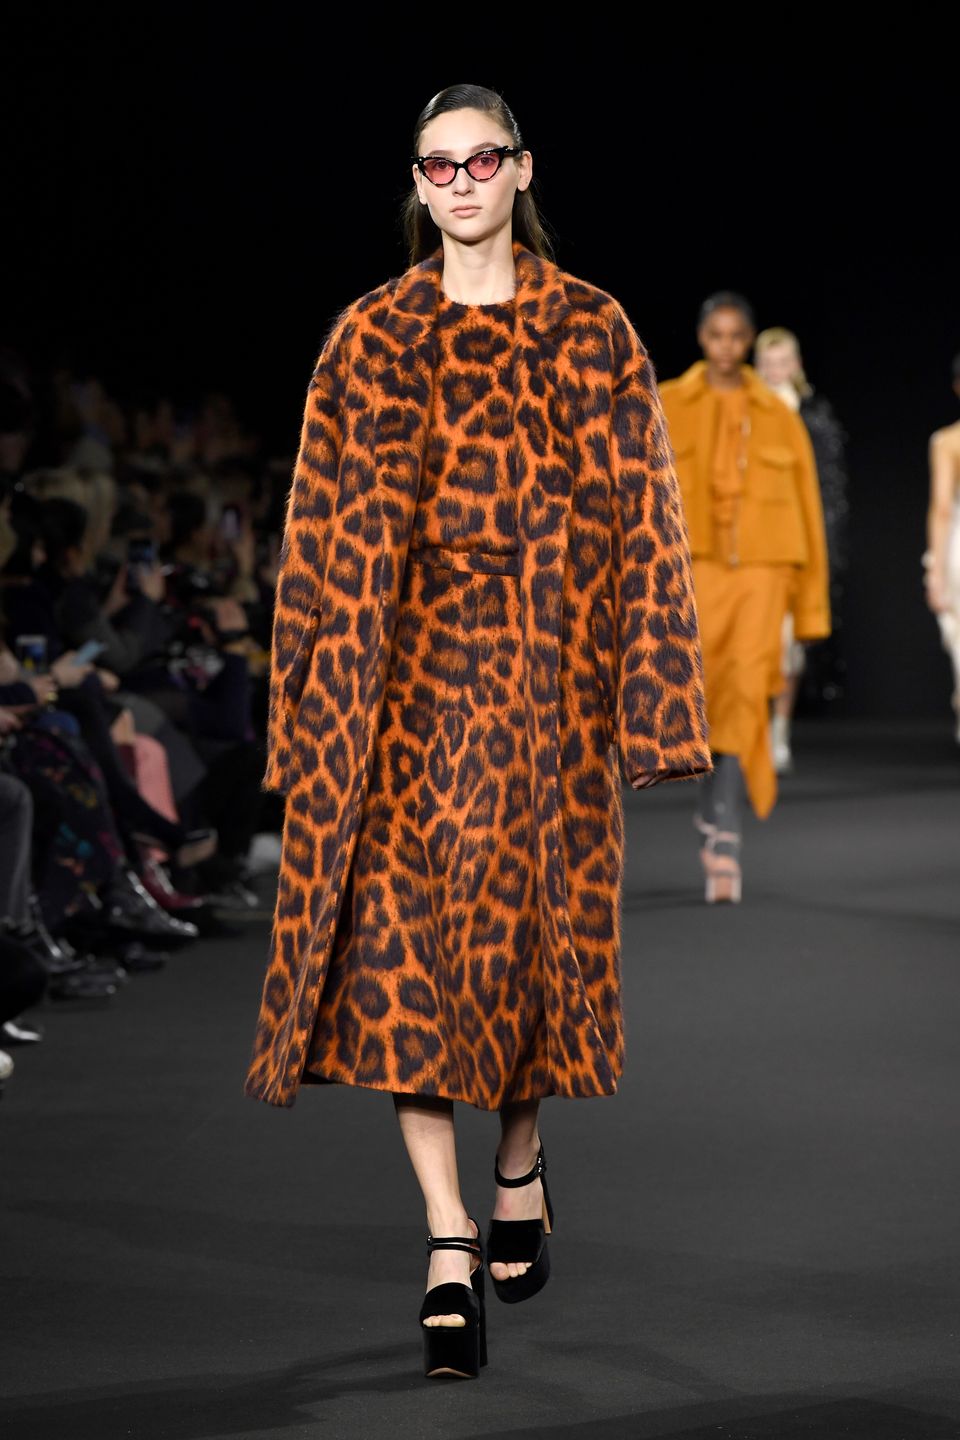 The Chicest Outfits From Paris Fashion Week 2020 | HuffPost Life